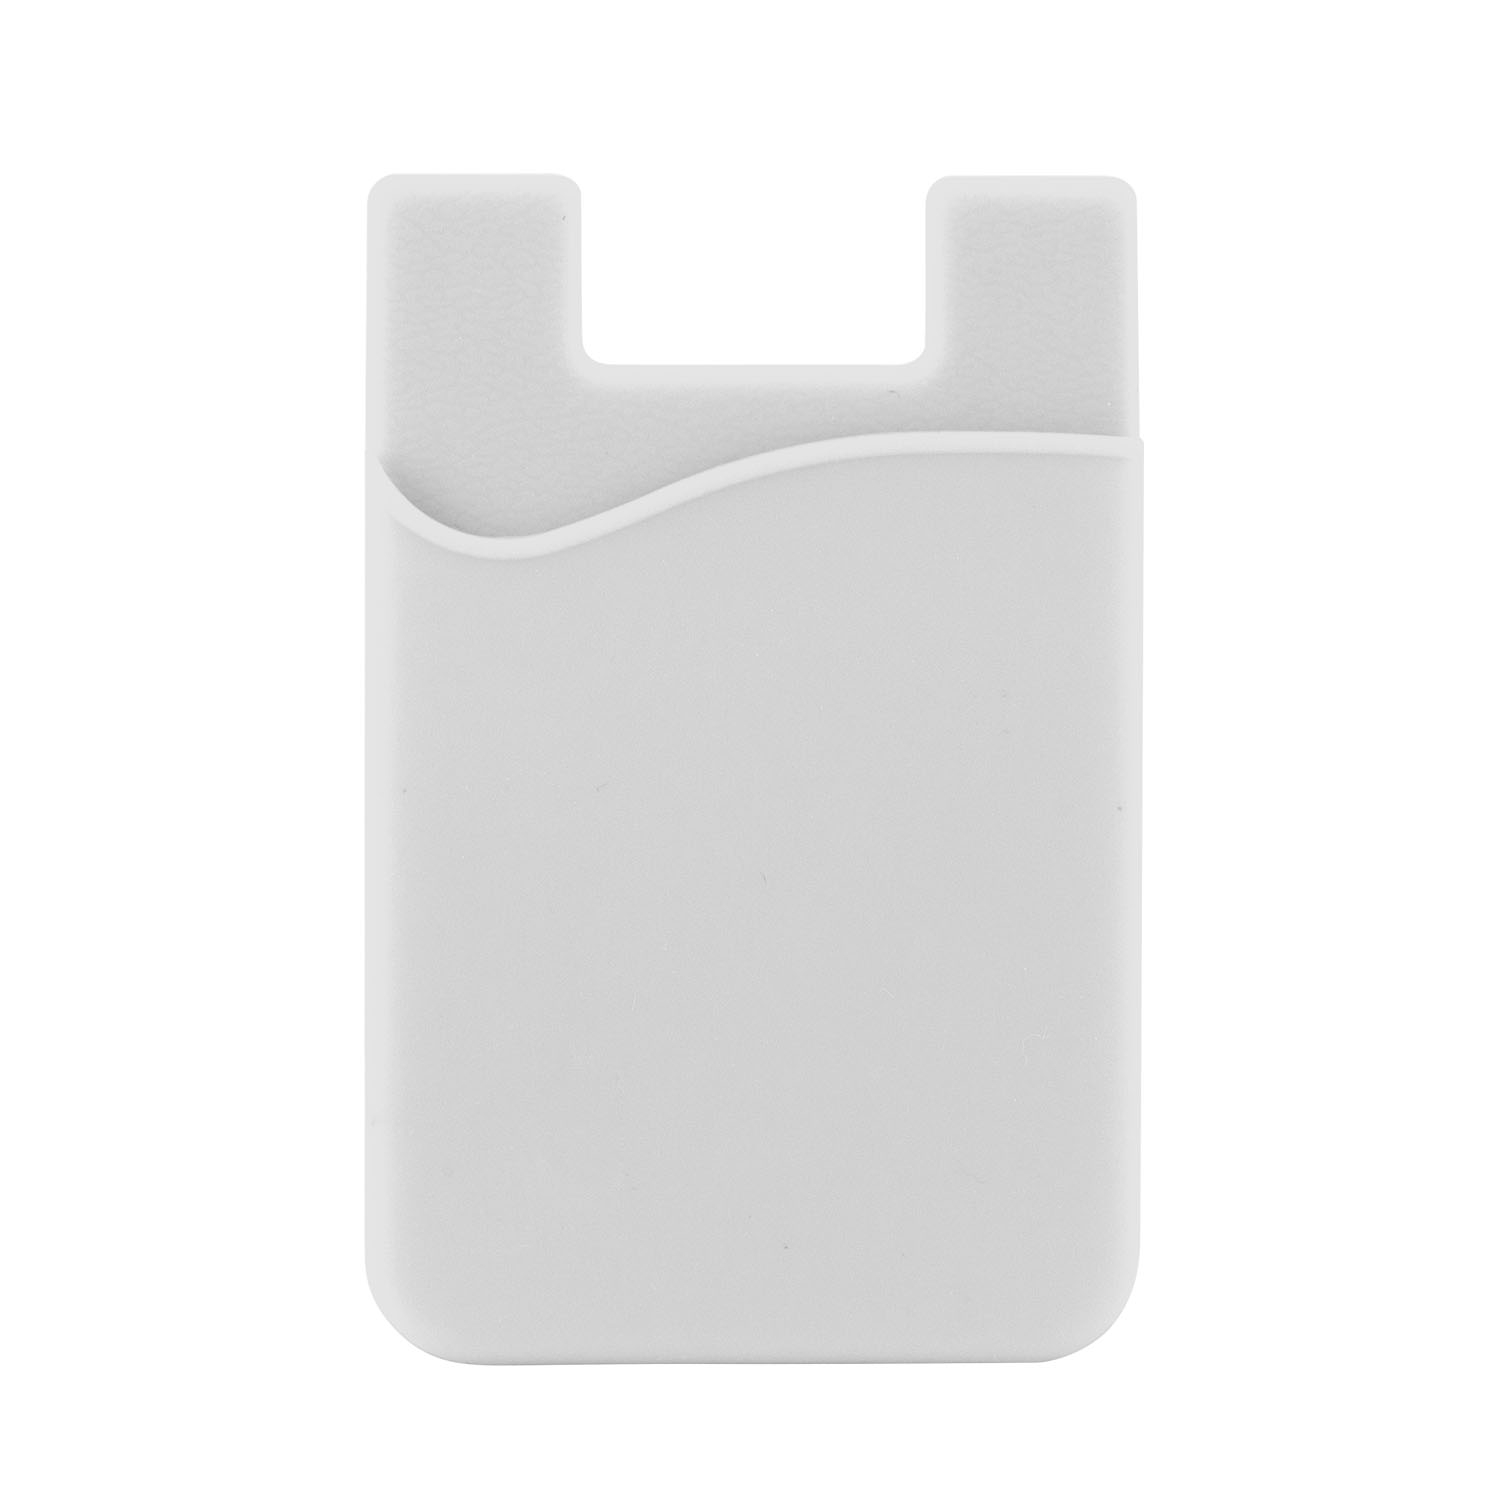 Silicone Phone Card Holder – Publicity Promotional Products